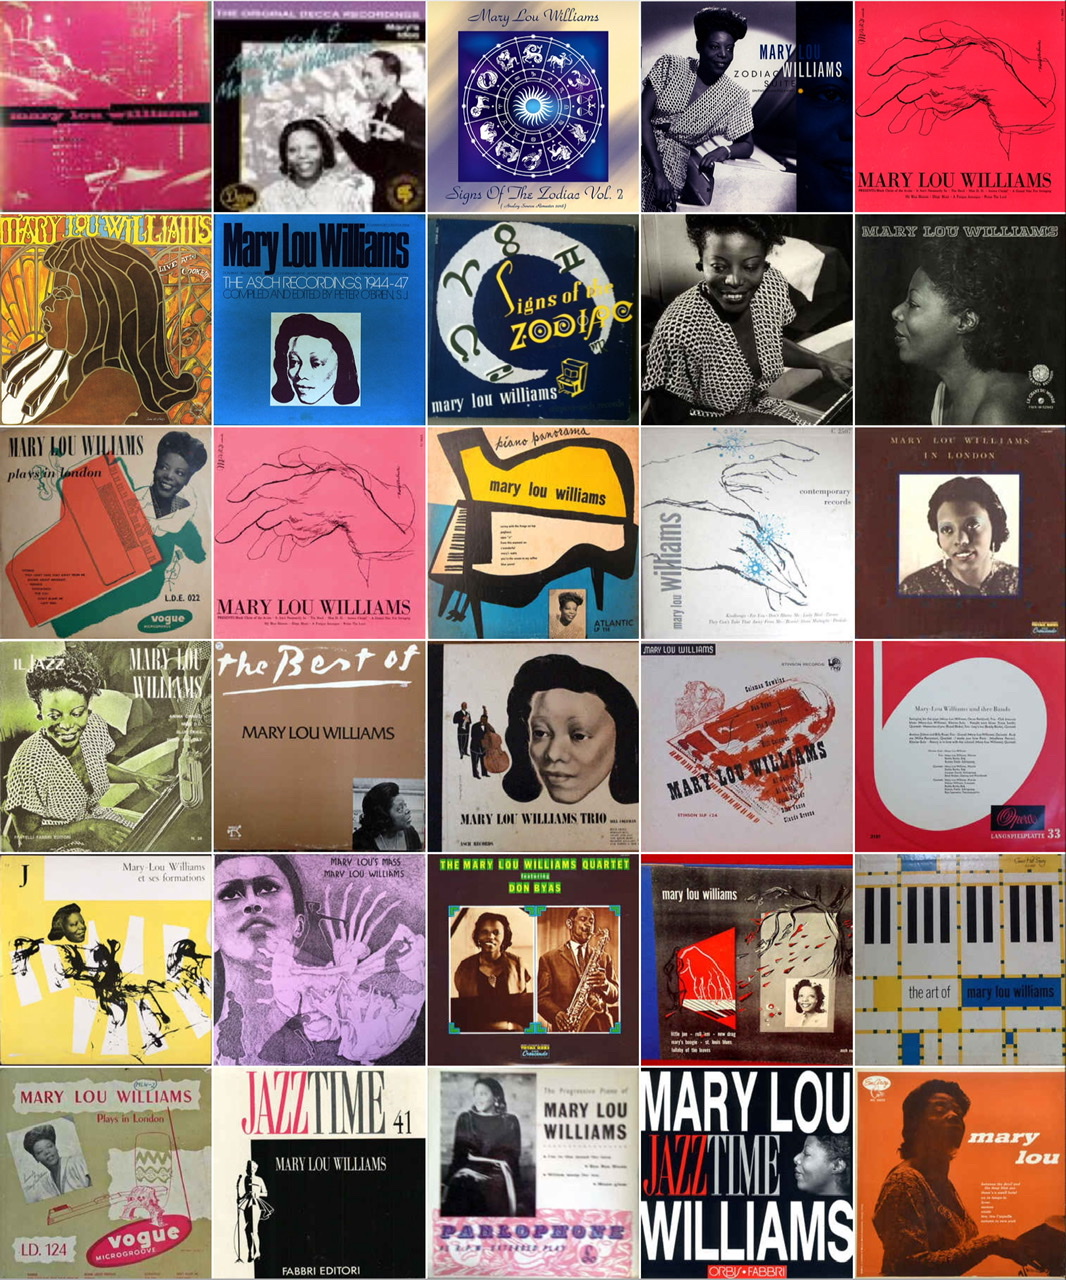 A collage of Mary Lou Williams album covers.